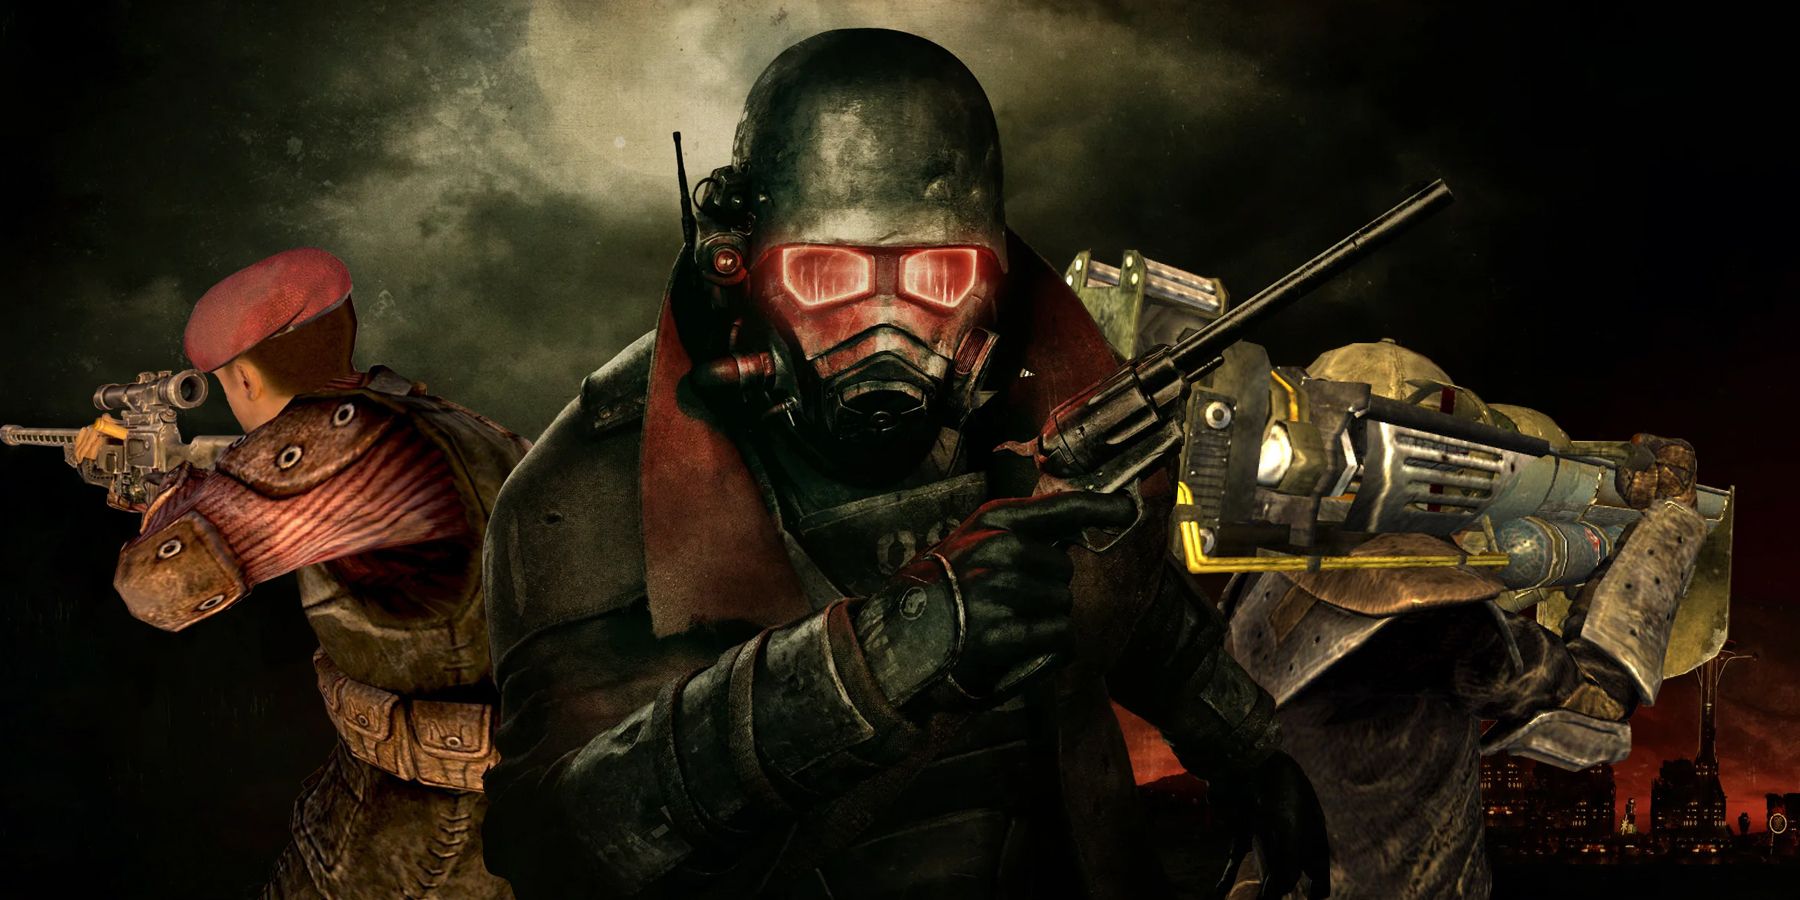 The 10 Best Fallout: New Vegas Mods, Ranked